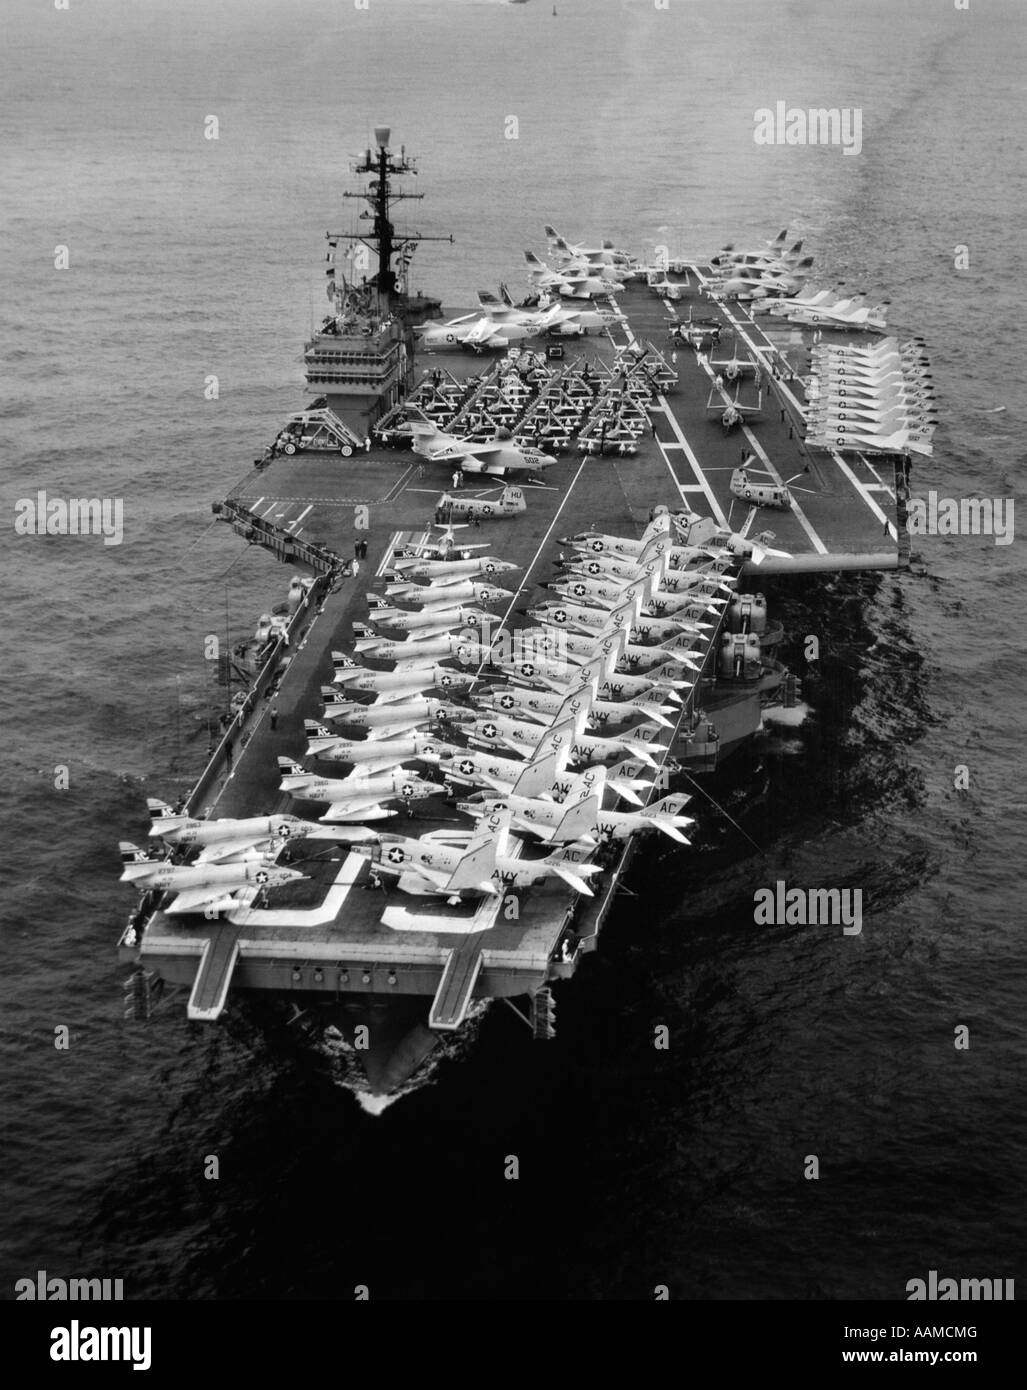 1960s AERIAL OF USS SARATOGA AIRCRAFT CARRIER Stock Photo - Alamy